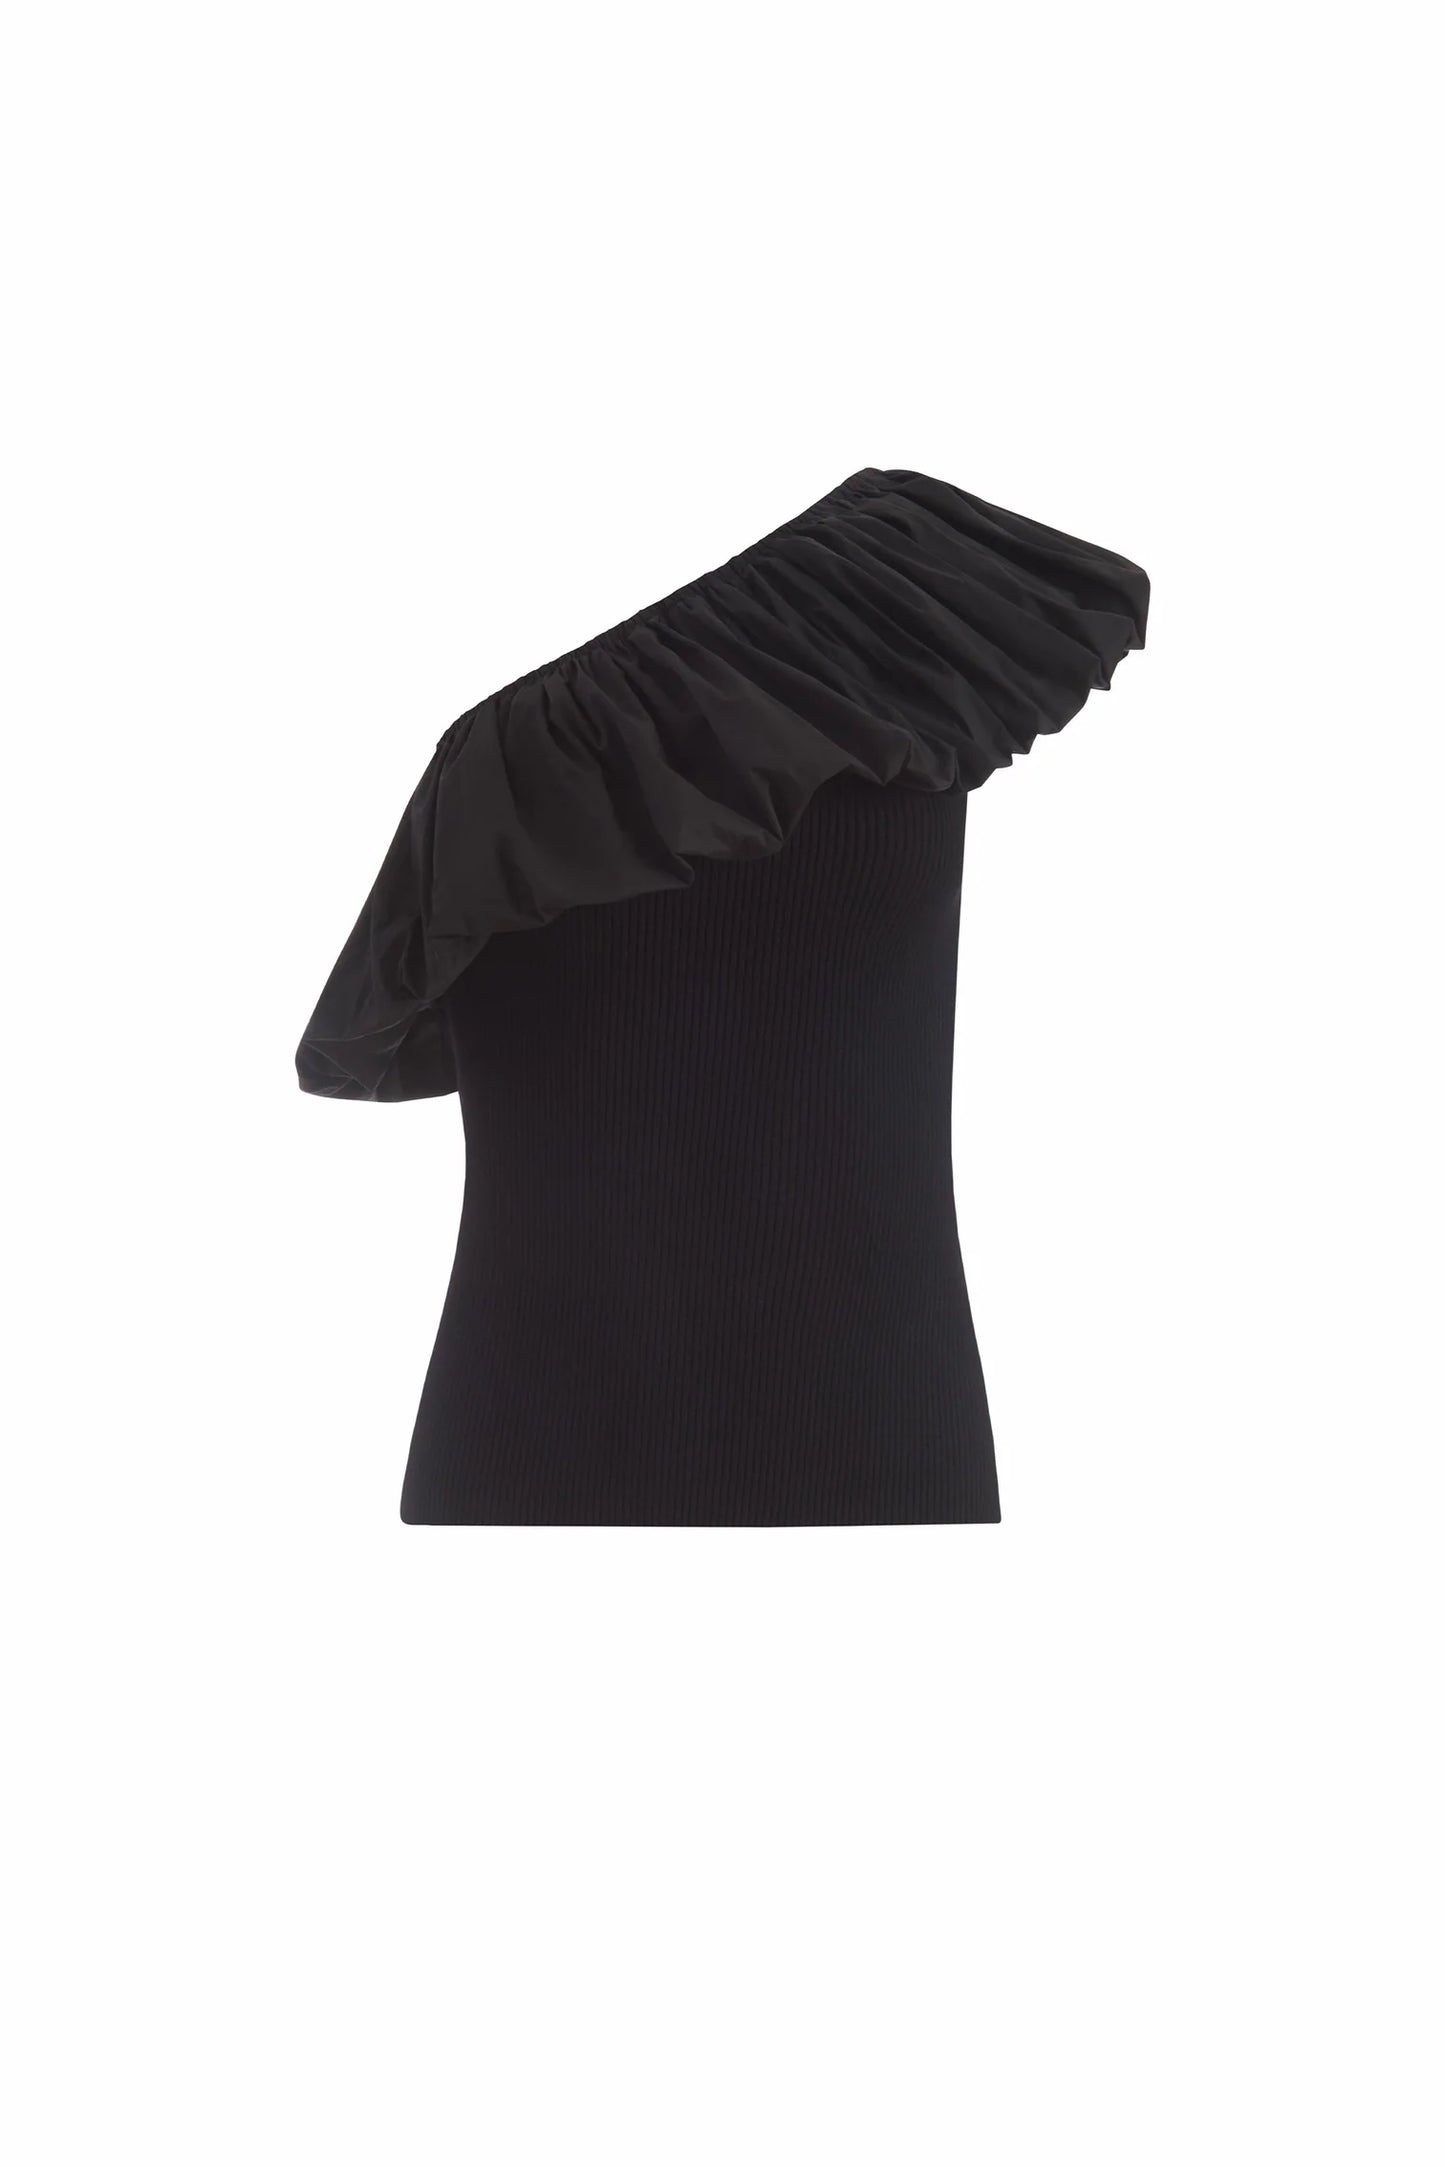 Marie Oliver Lucy Top - Black